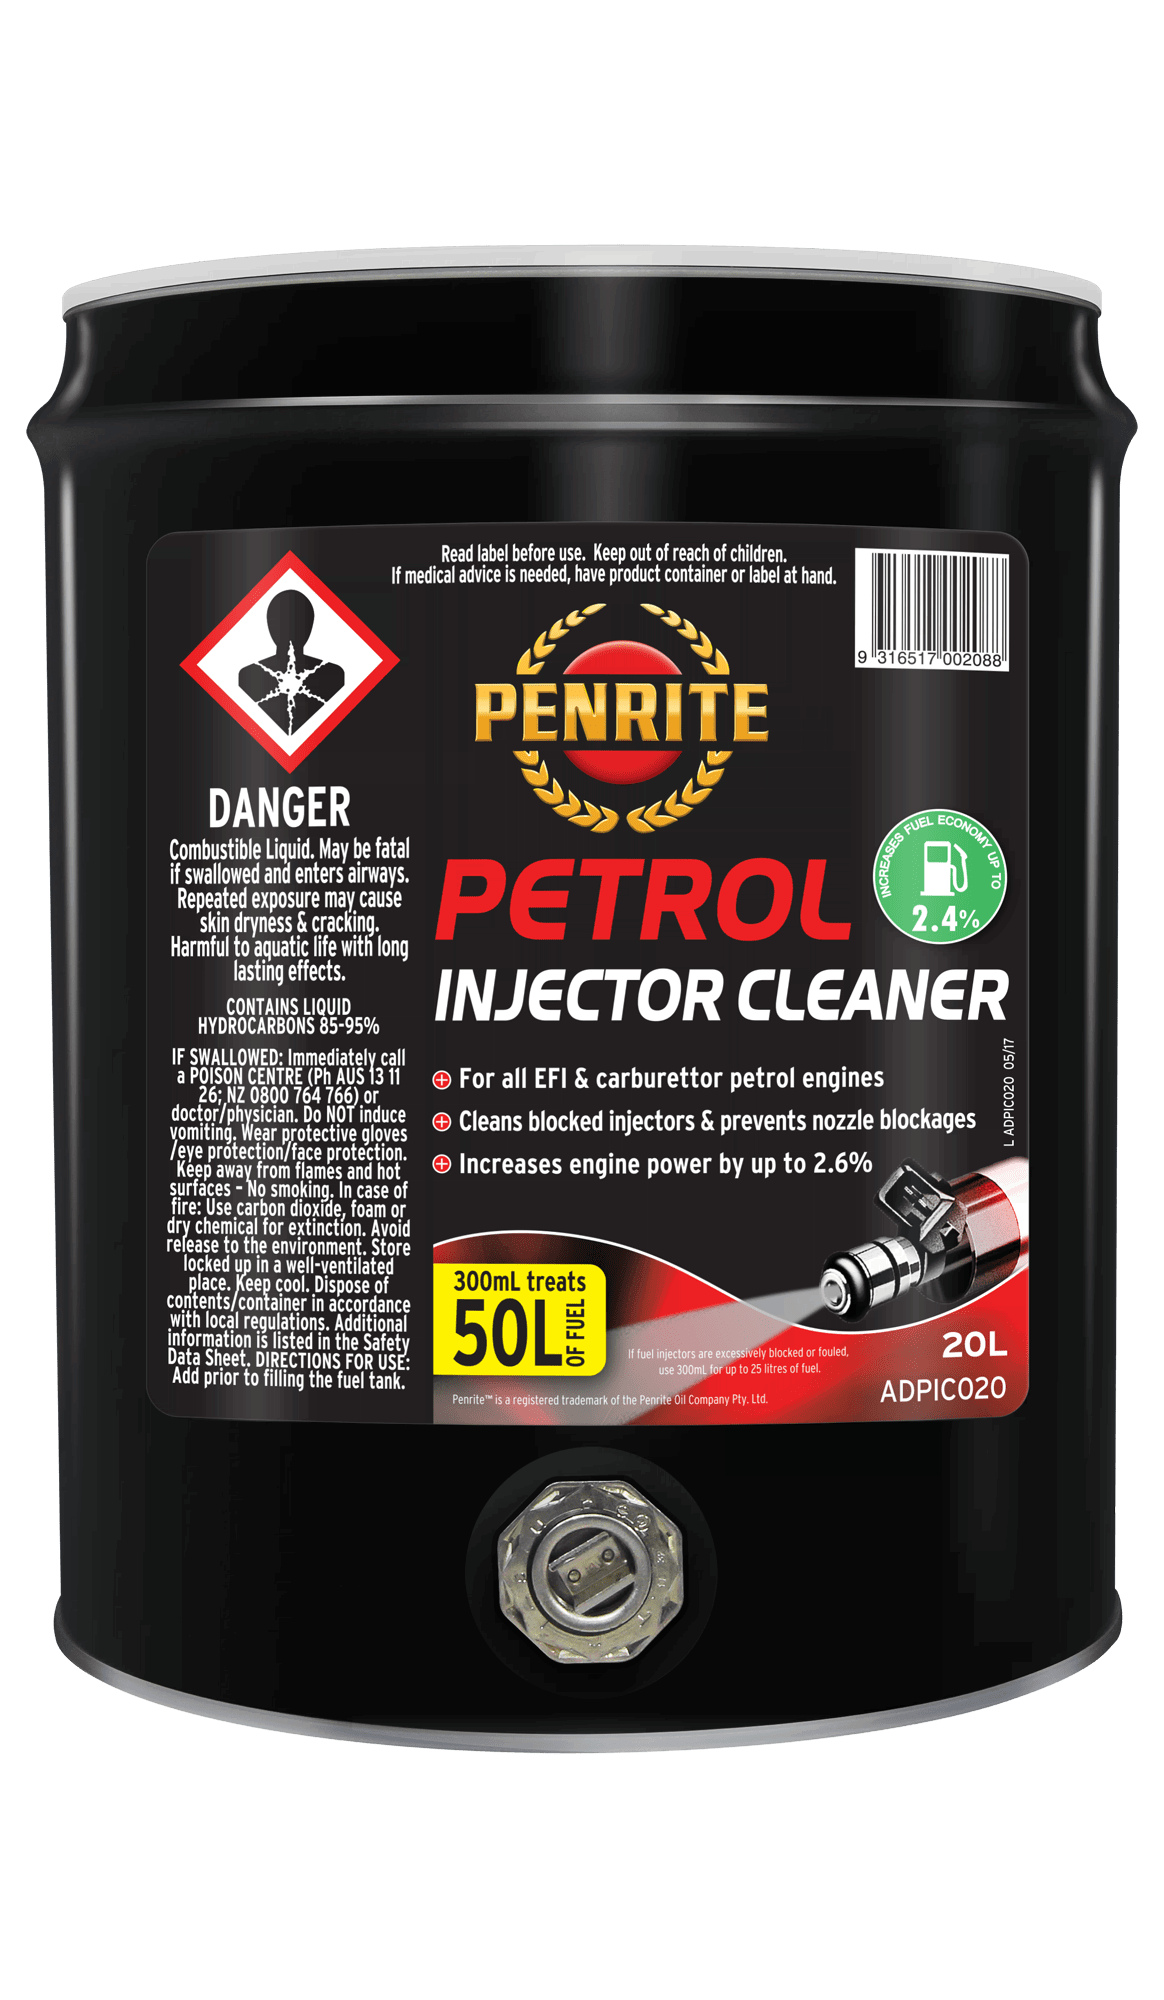 PETROL INJECTOR CLEANER 2